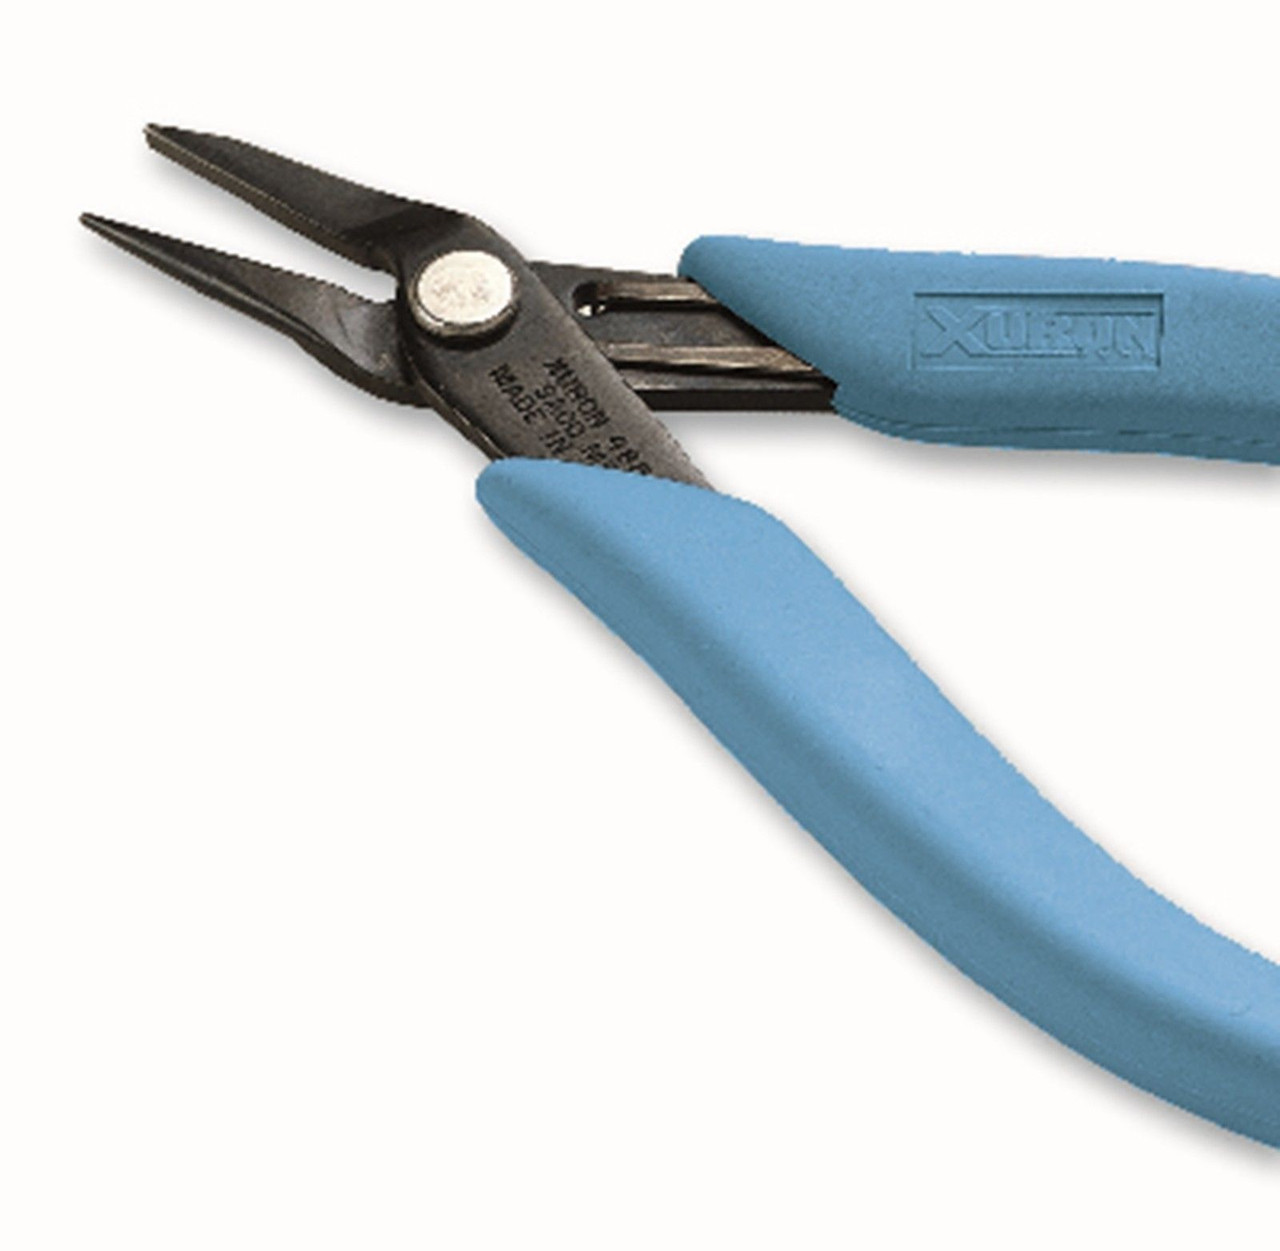 Xuron - 485S Long nose/ Chaion Nose Serrated Plier - Midwest Model Railroad